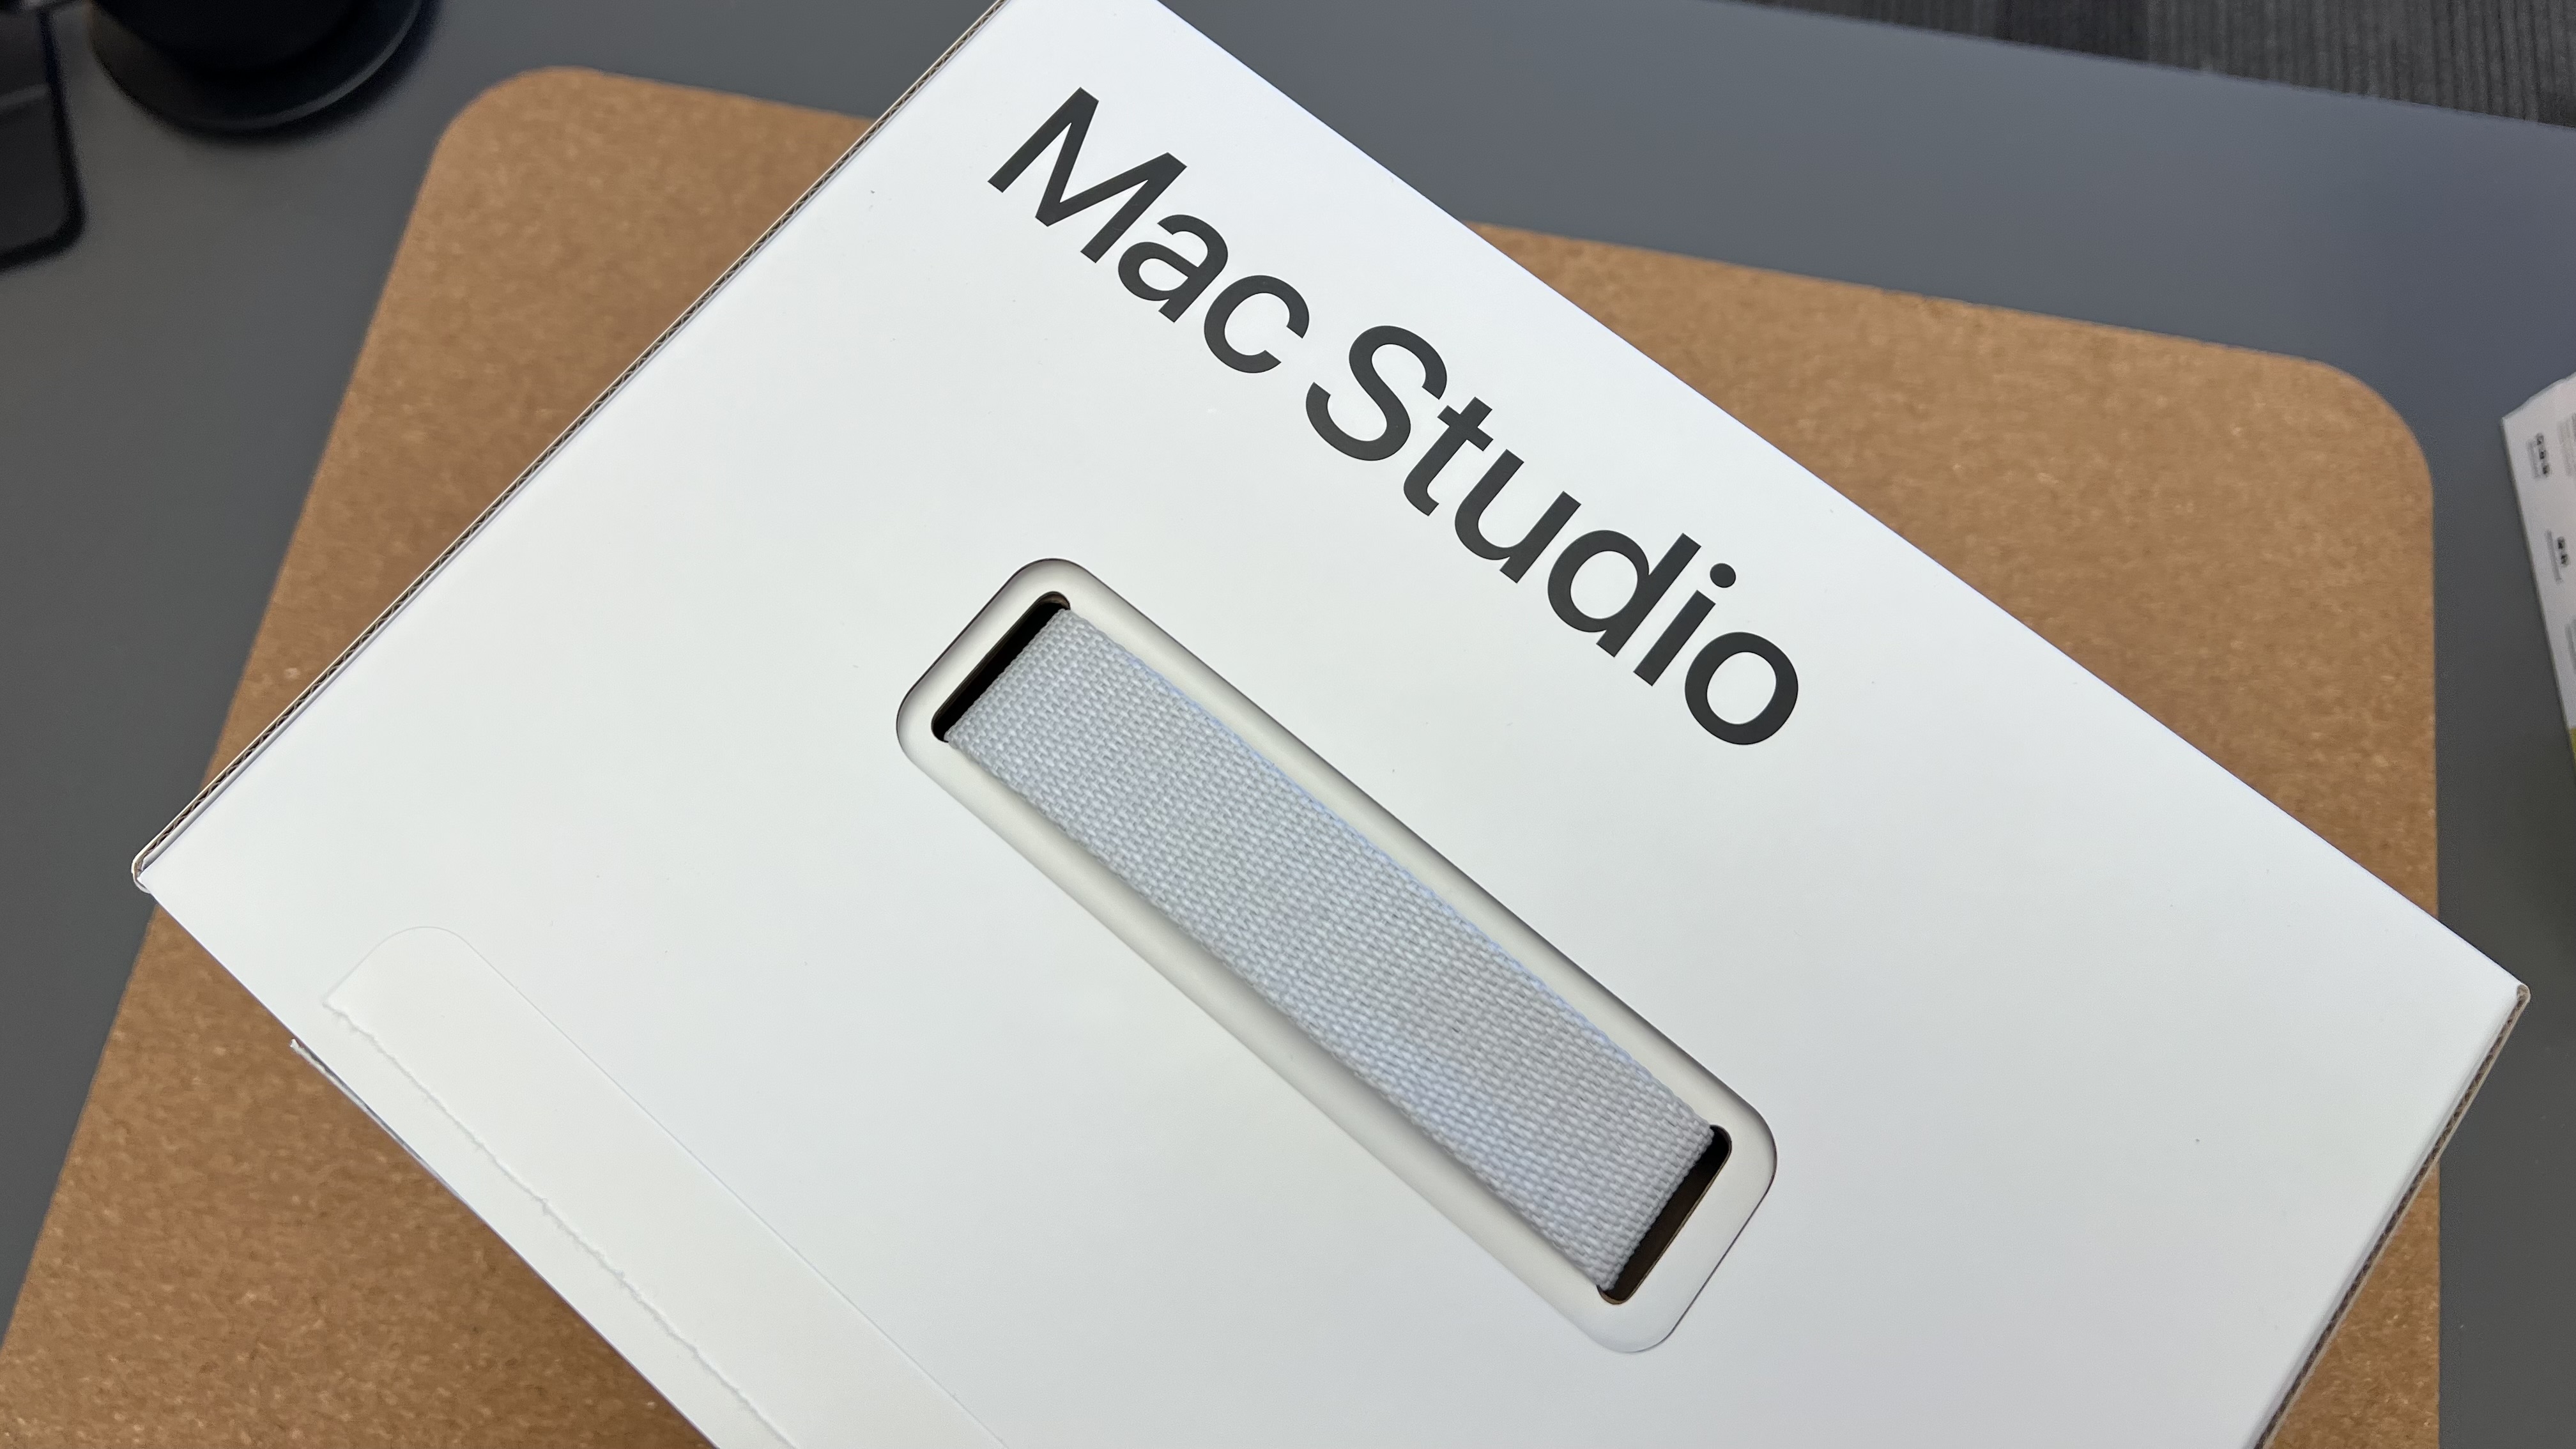 Mac Studio hands-on: Unboxing and first impressions - 9to5Mac